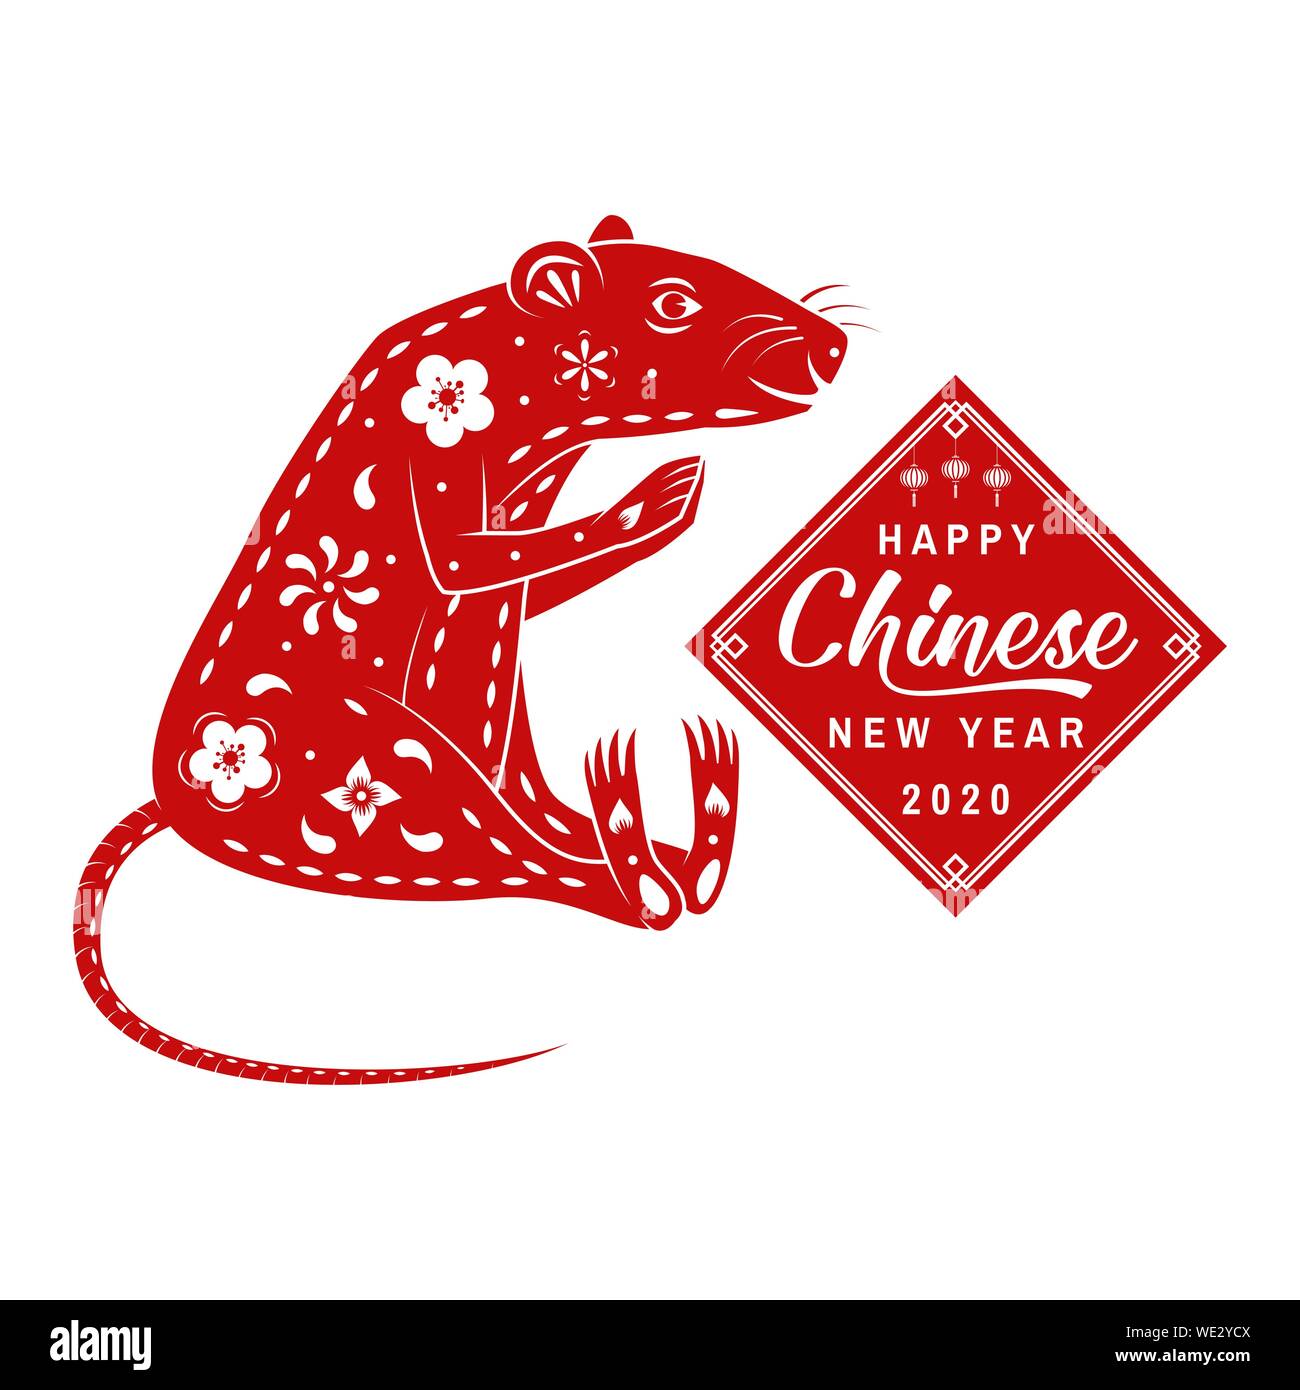 Happy Chinese New Year 2020 Design Vector Illustration Chinese